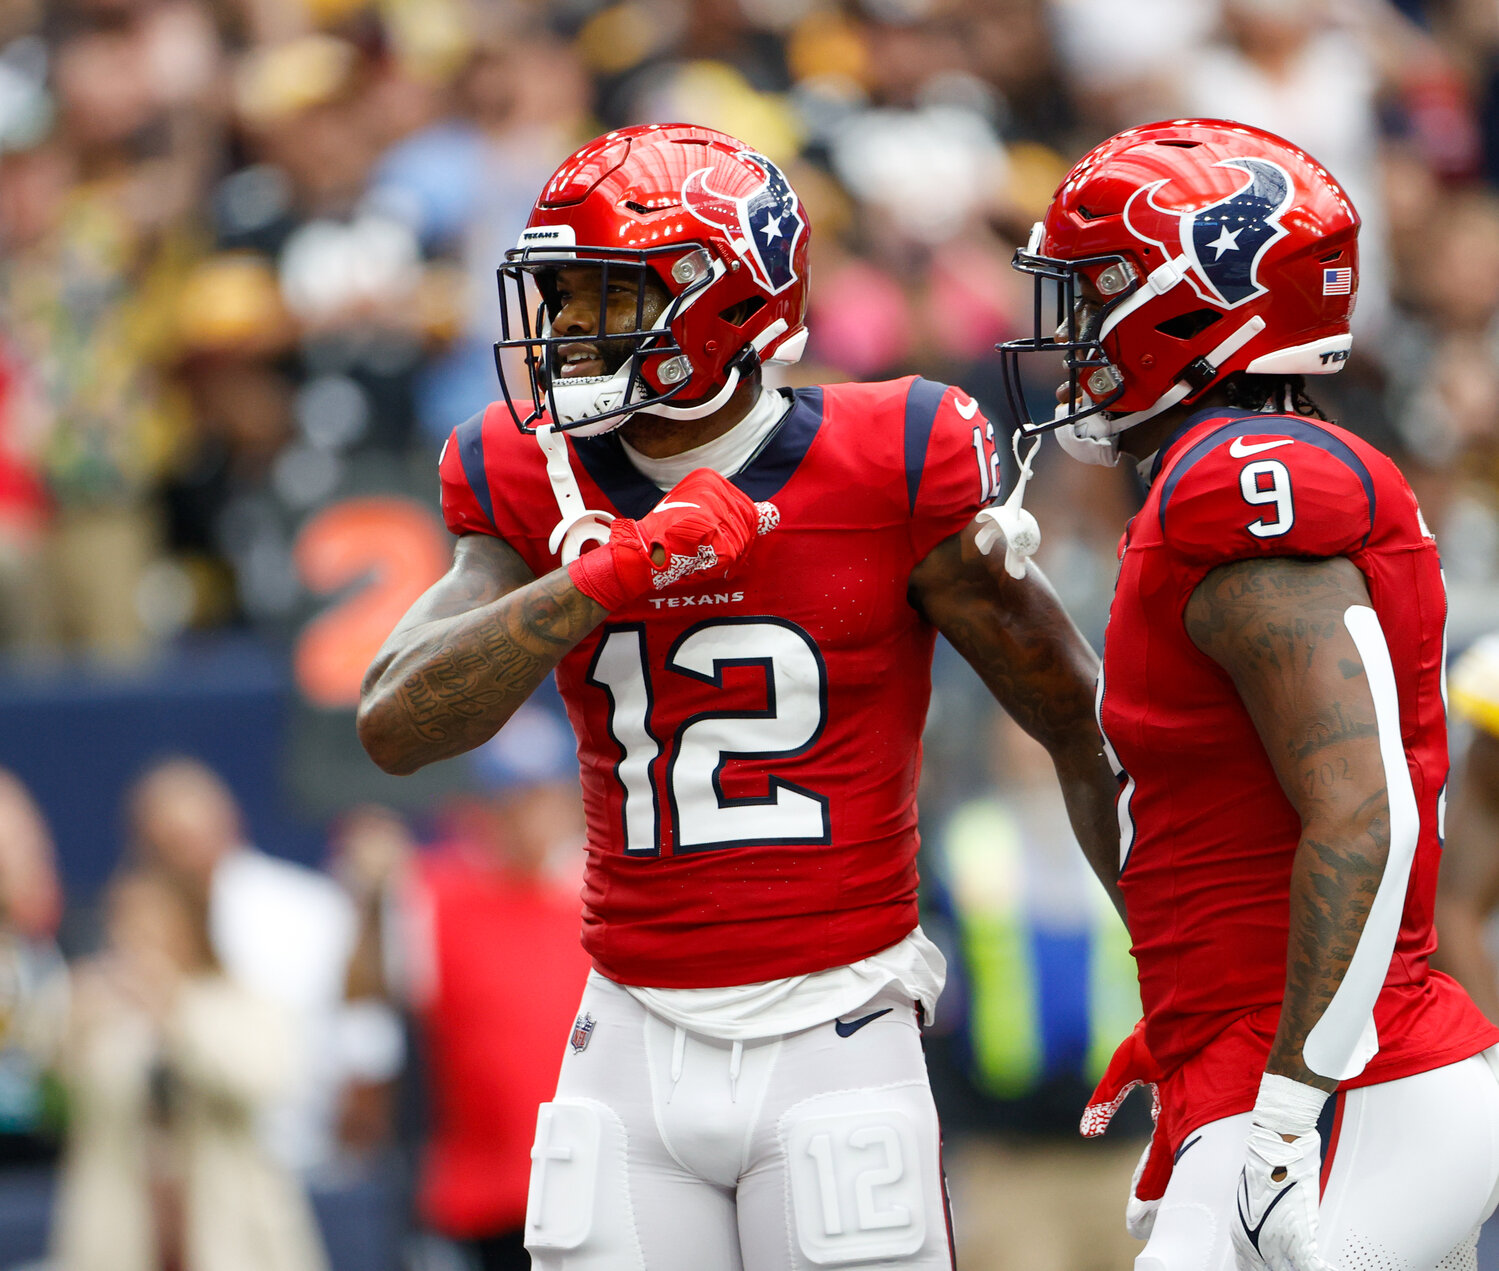 Texans wide receiver Nico Collins (12) reacts after scoring on a 2-yard touchdown catch during an NFL game between the Houston Texans and the Pittsburgh Steelers on October 1, 2023 in Houston.